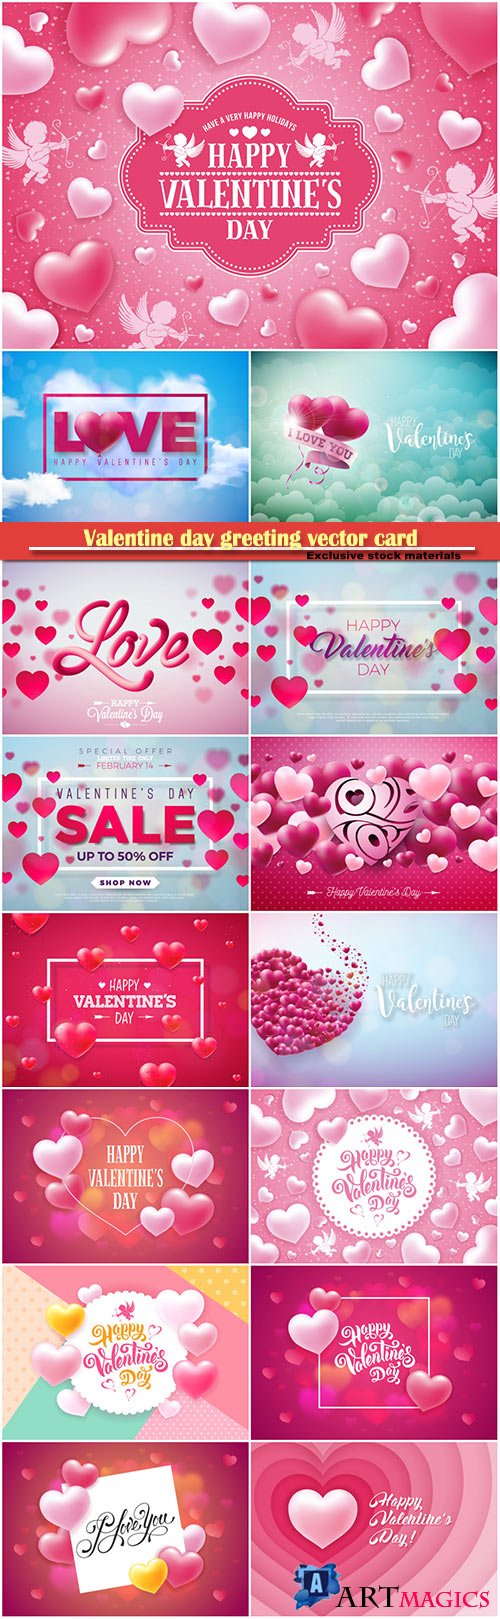 Valentine day greeting vector card, hearts i love you # 6